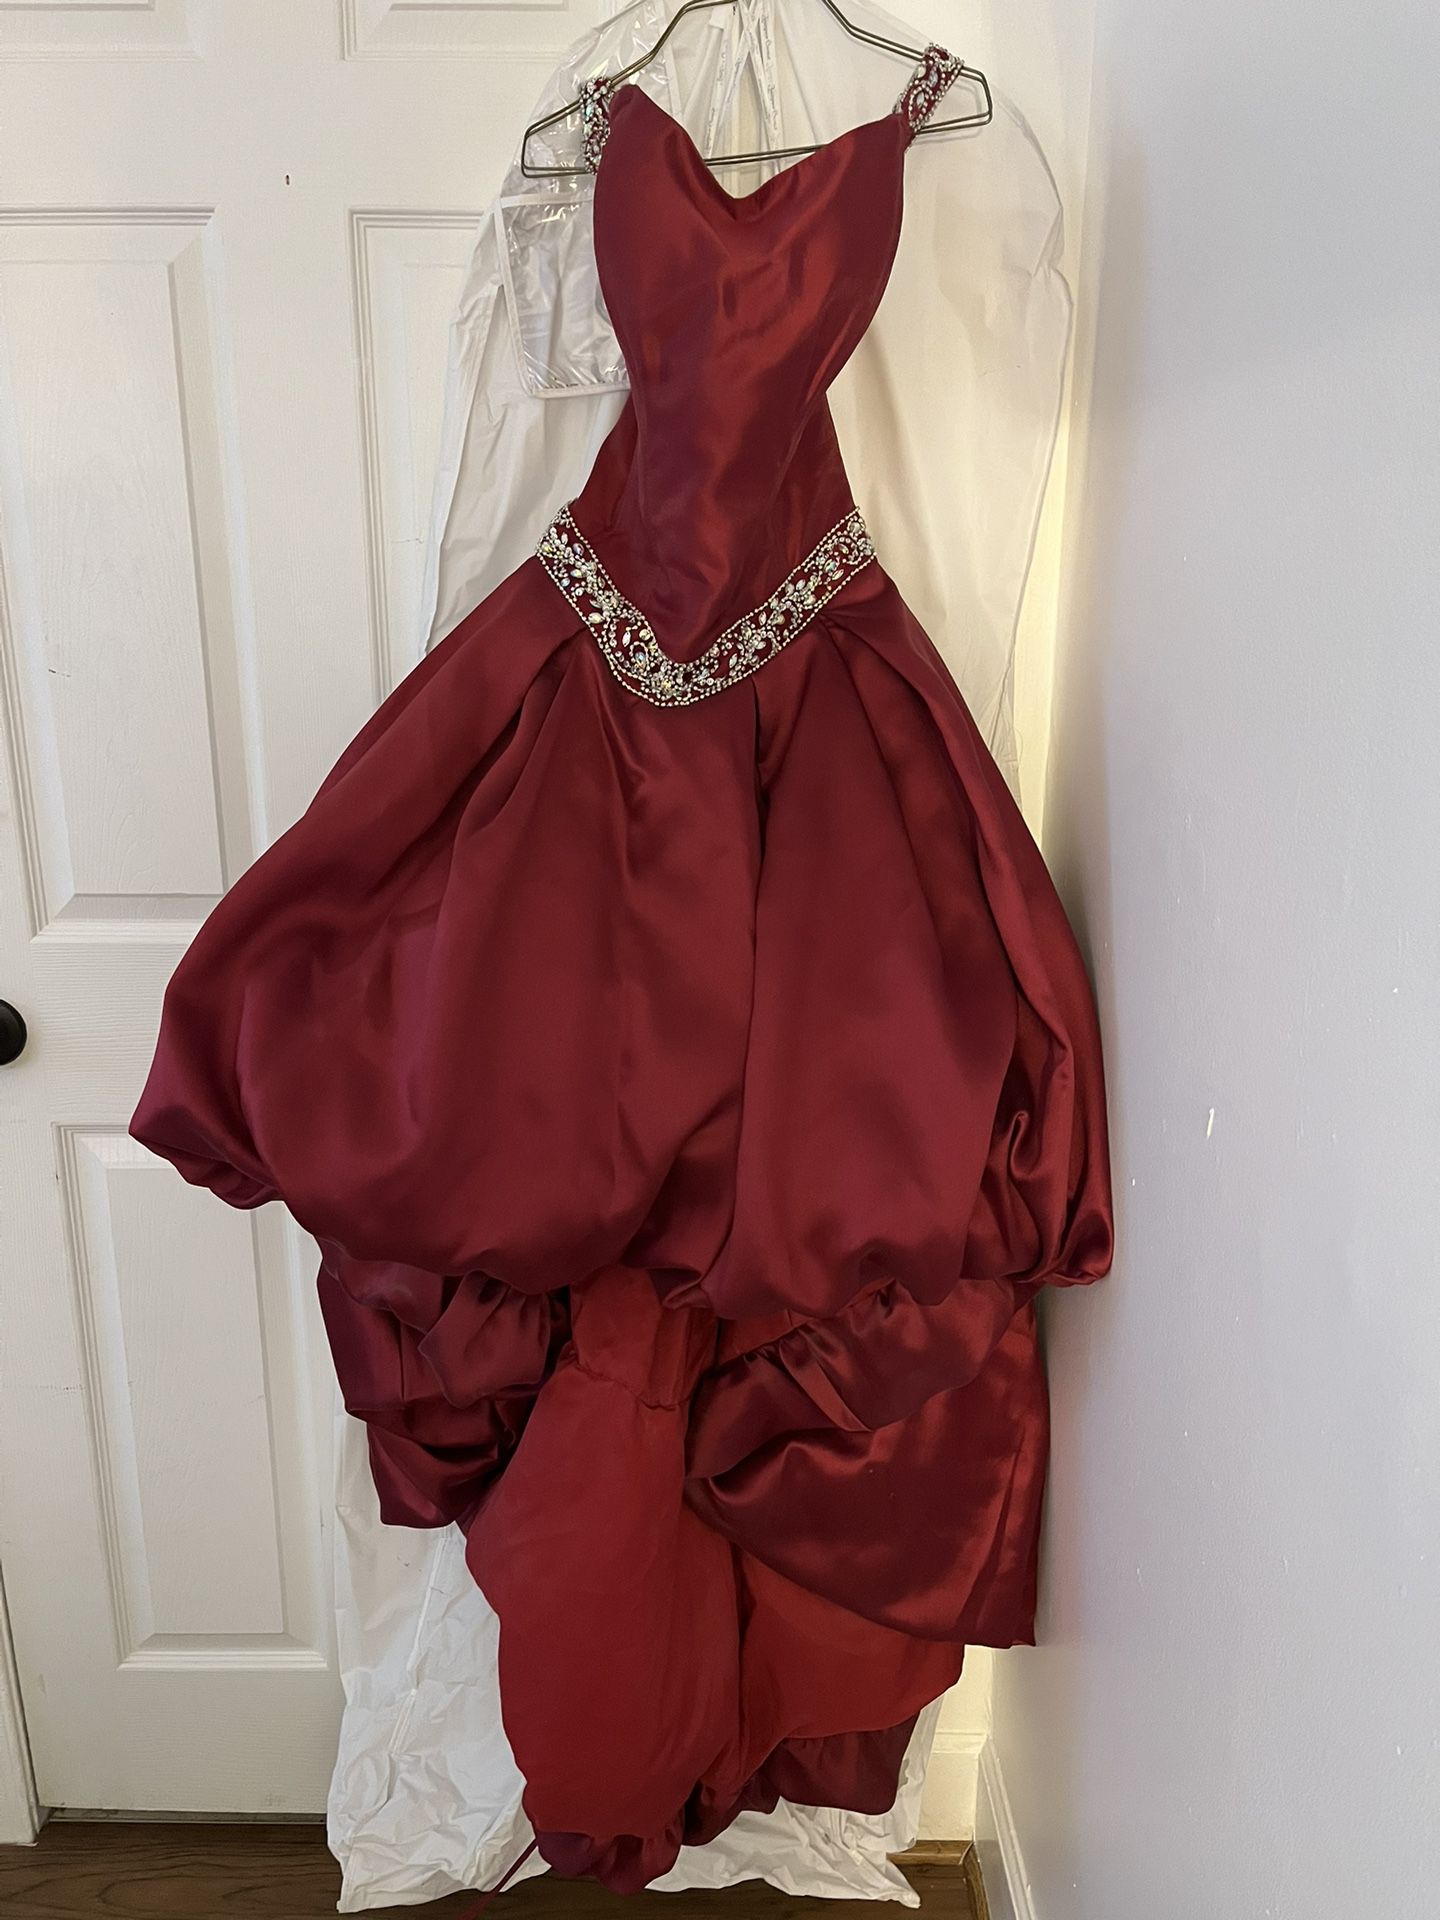 Maroon Metallic Ball/Prom Gown Size 14